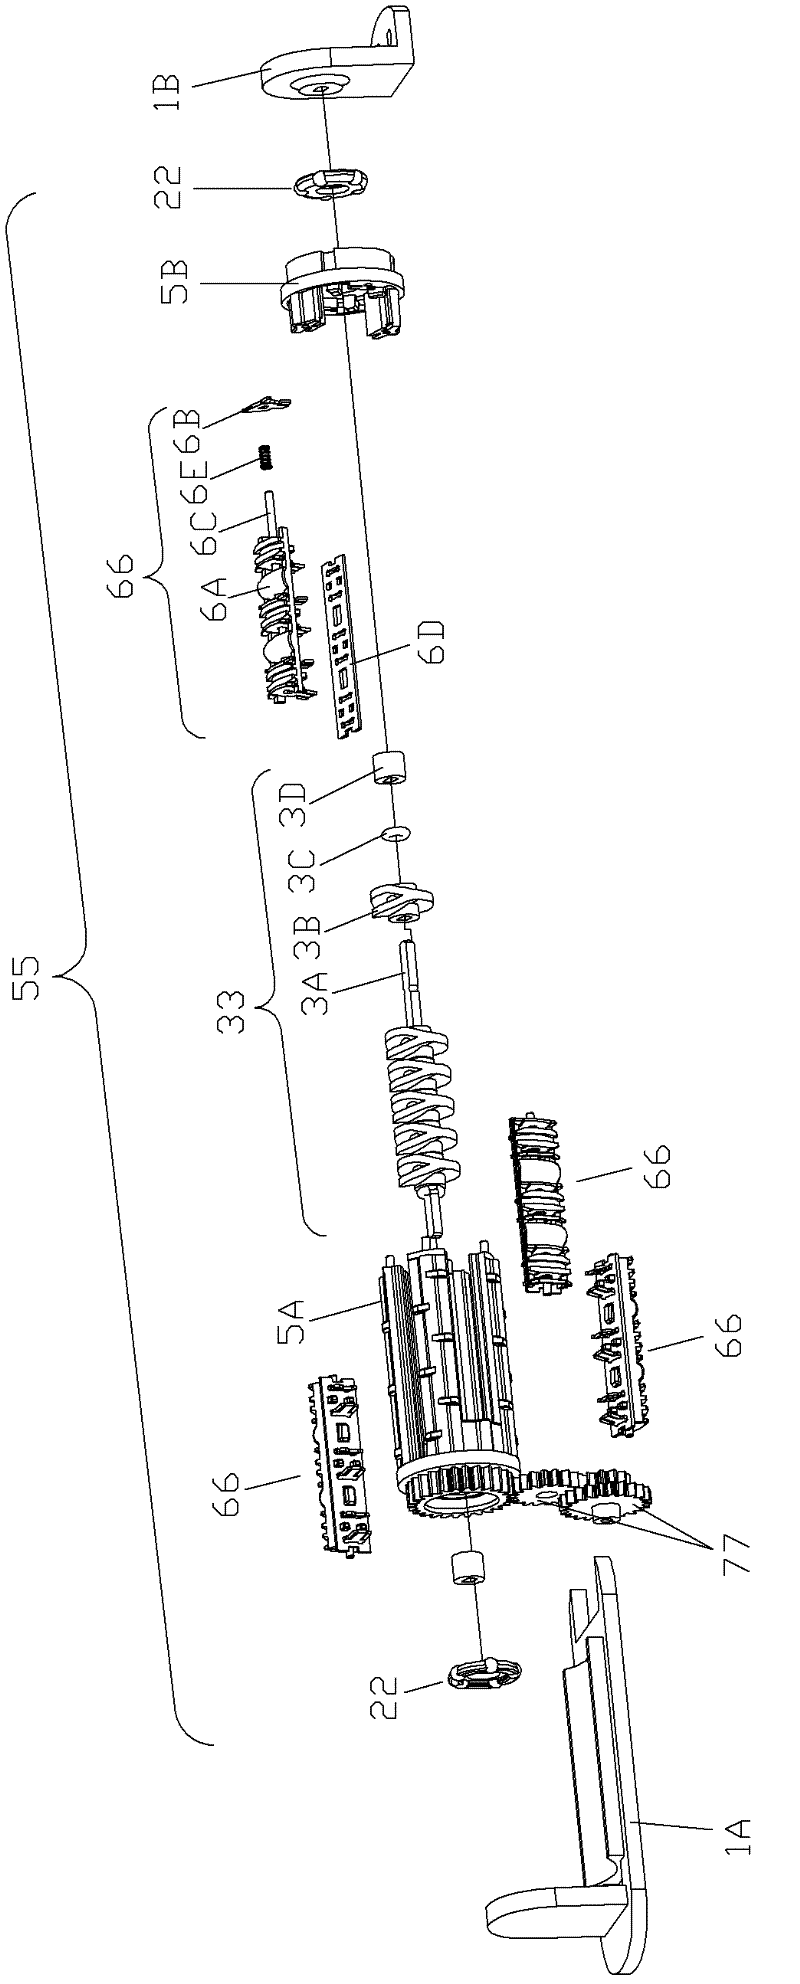 Electric dehairing device